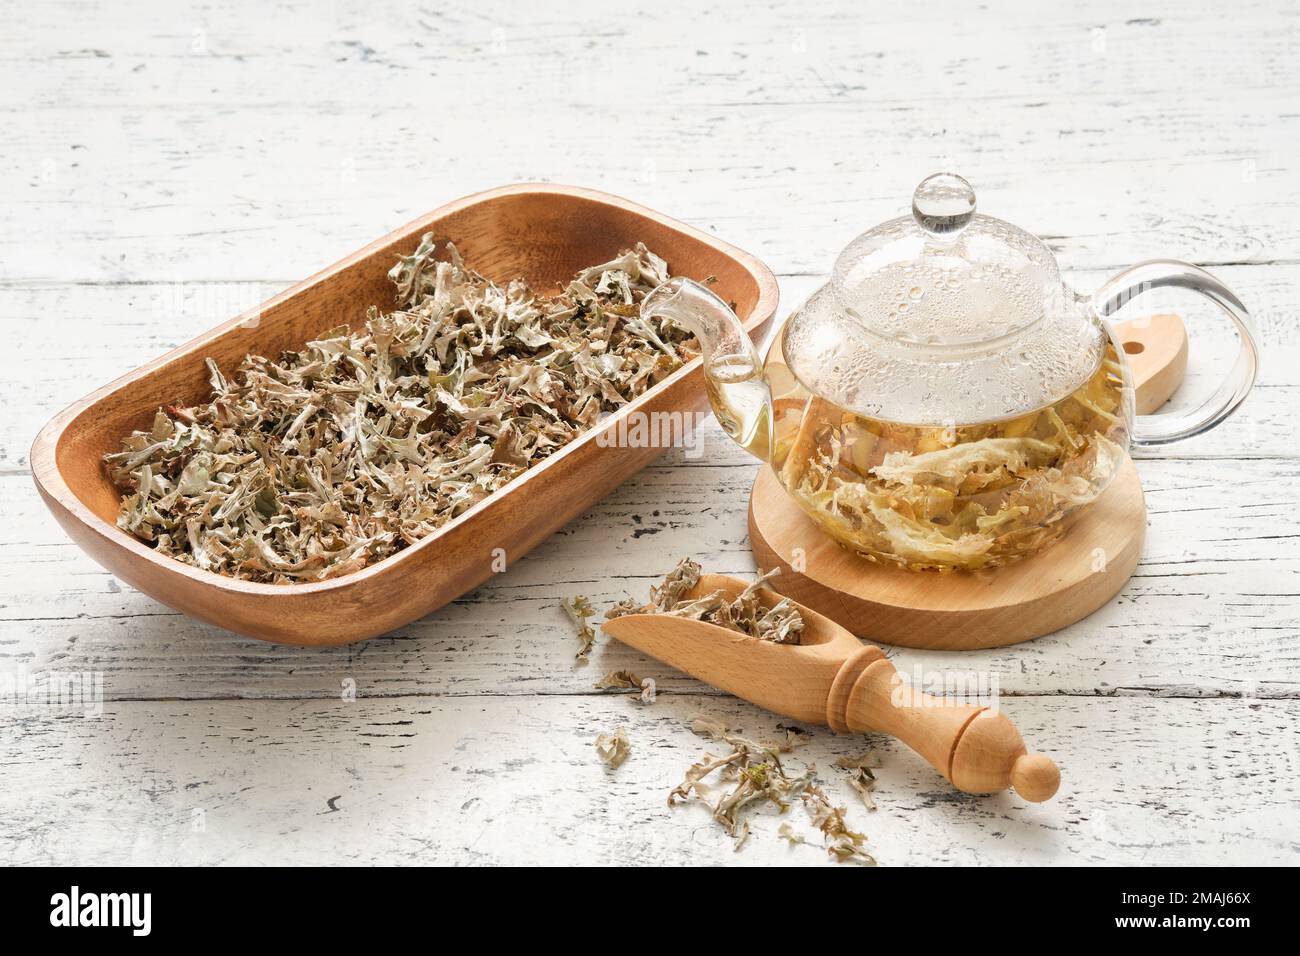 Glass teapot of herbal Icelandic moss tea. Wooden scoop and bowl of dried Iceland moss on white table. Cetraria islandica - latin name of plant. Alter Stock Photo